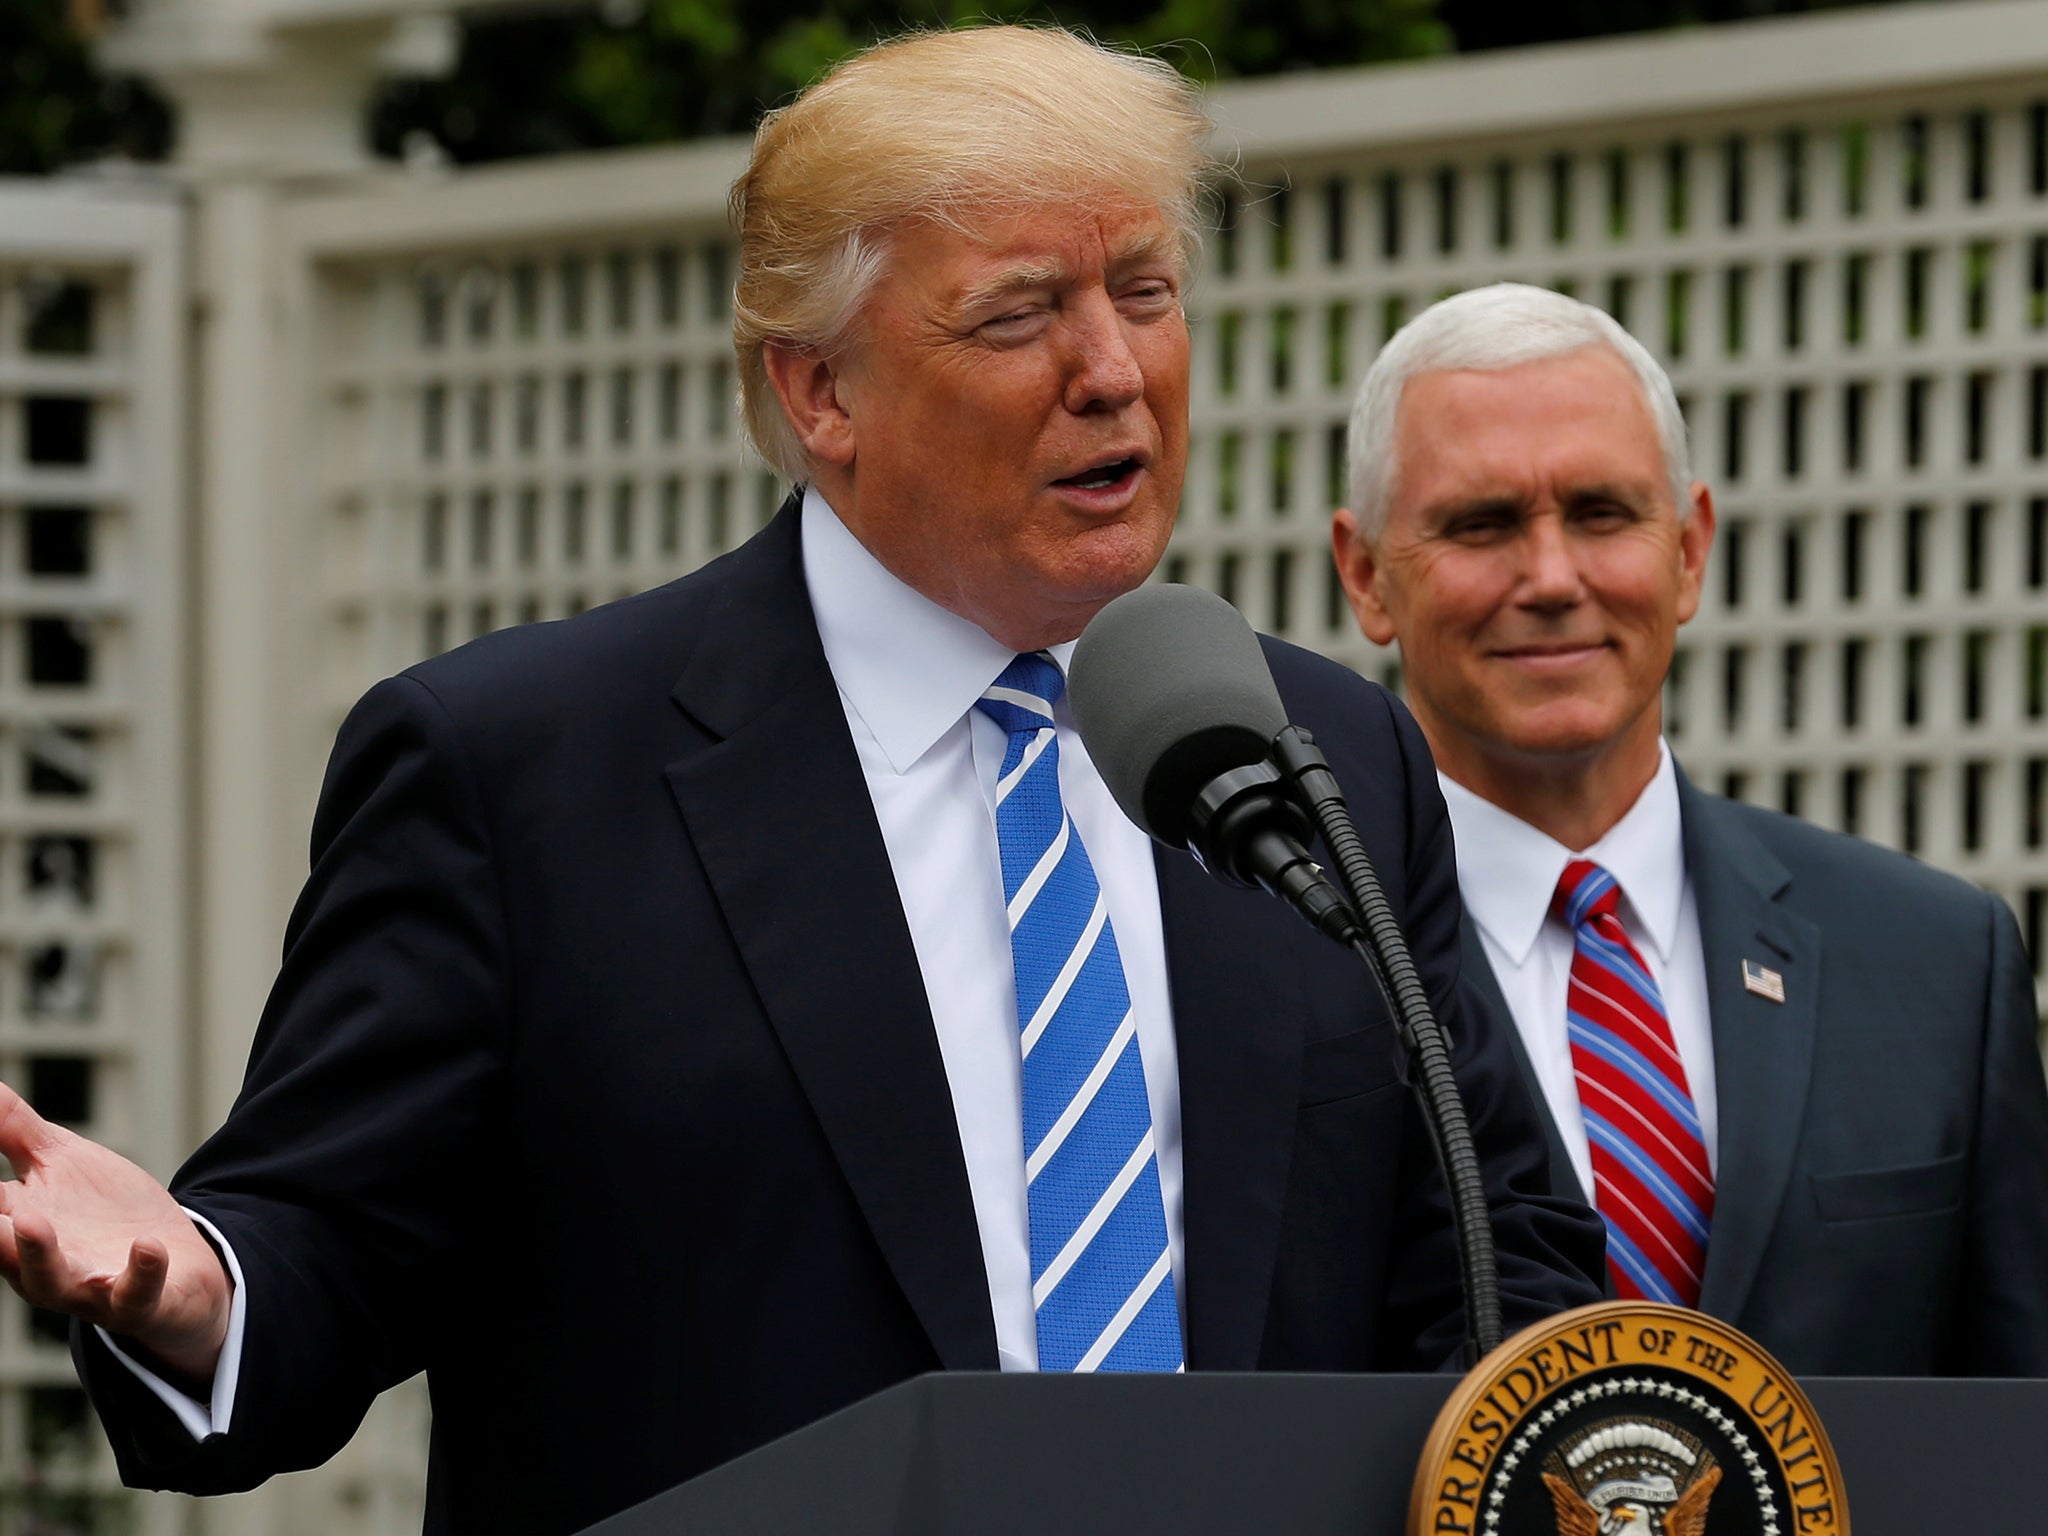 President Donald Trump, flanked by Vice President Mike Pence